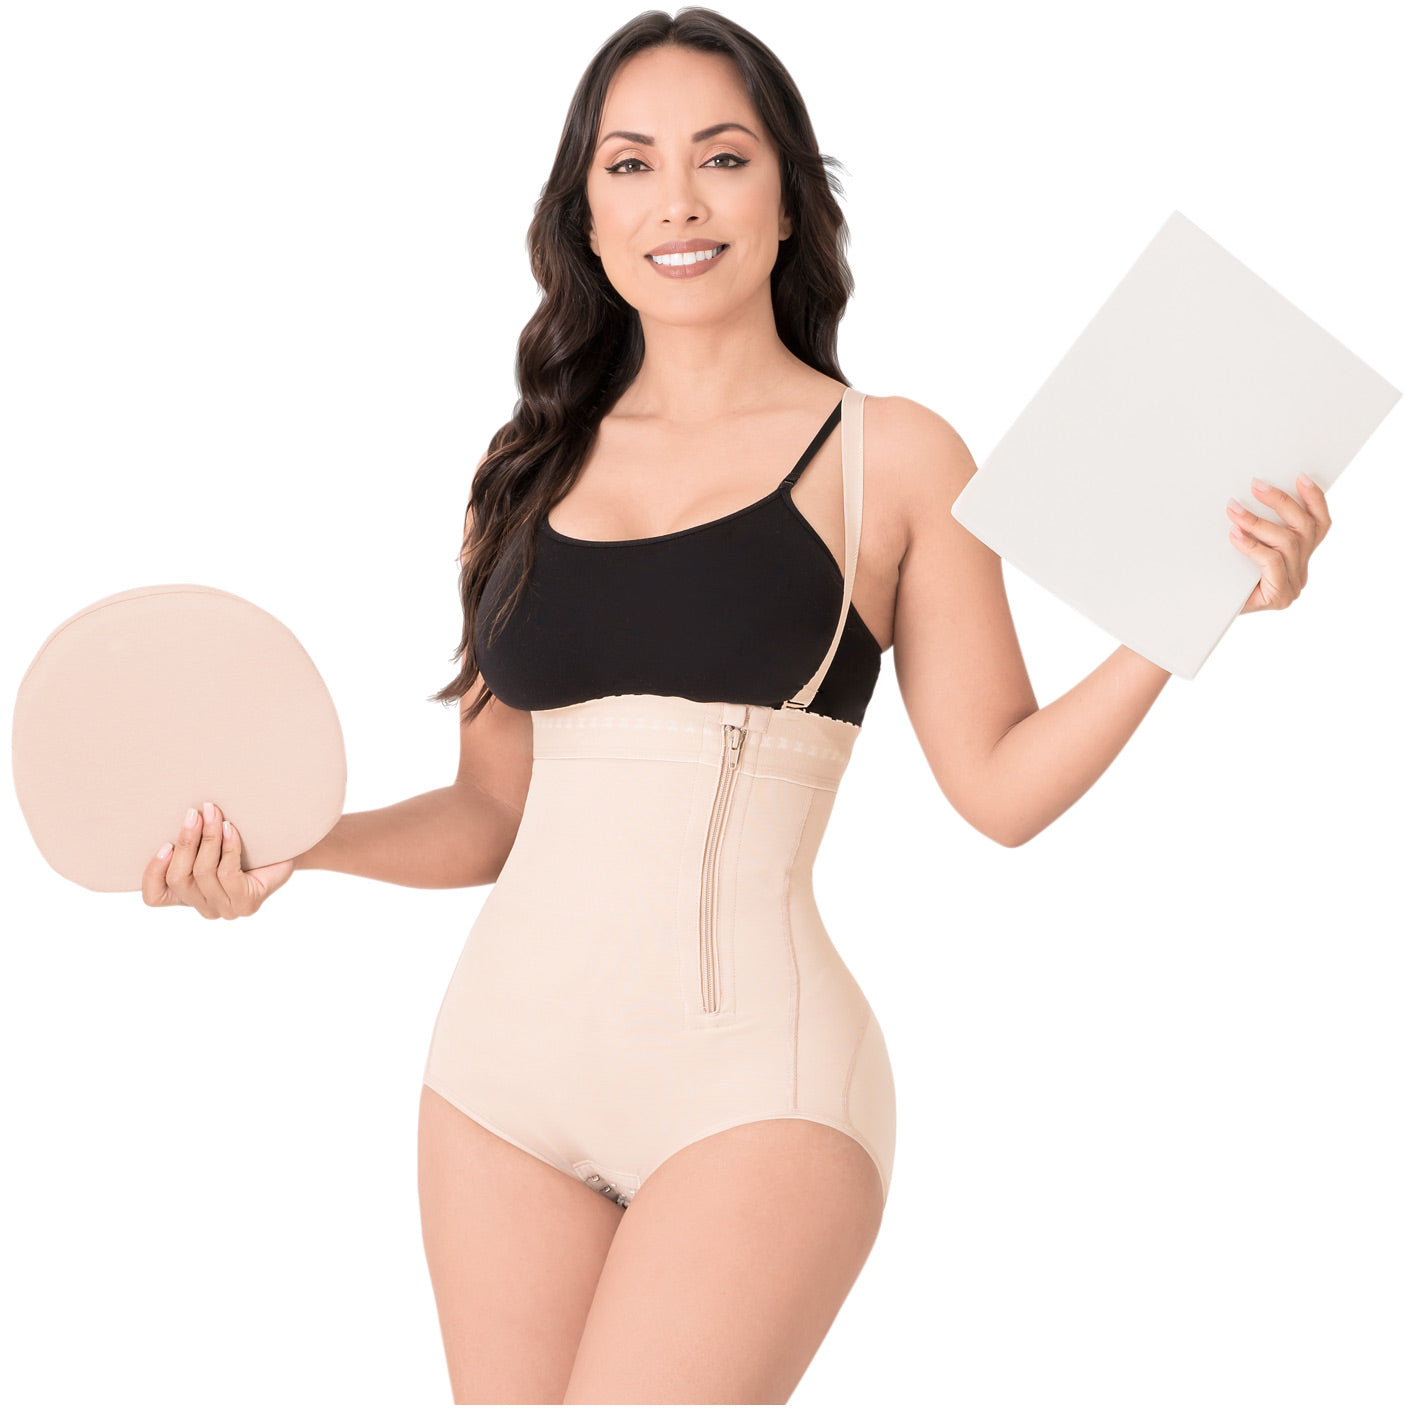 Abdominal Toning Girdle - Colombian Postsurgical Body shapers and